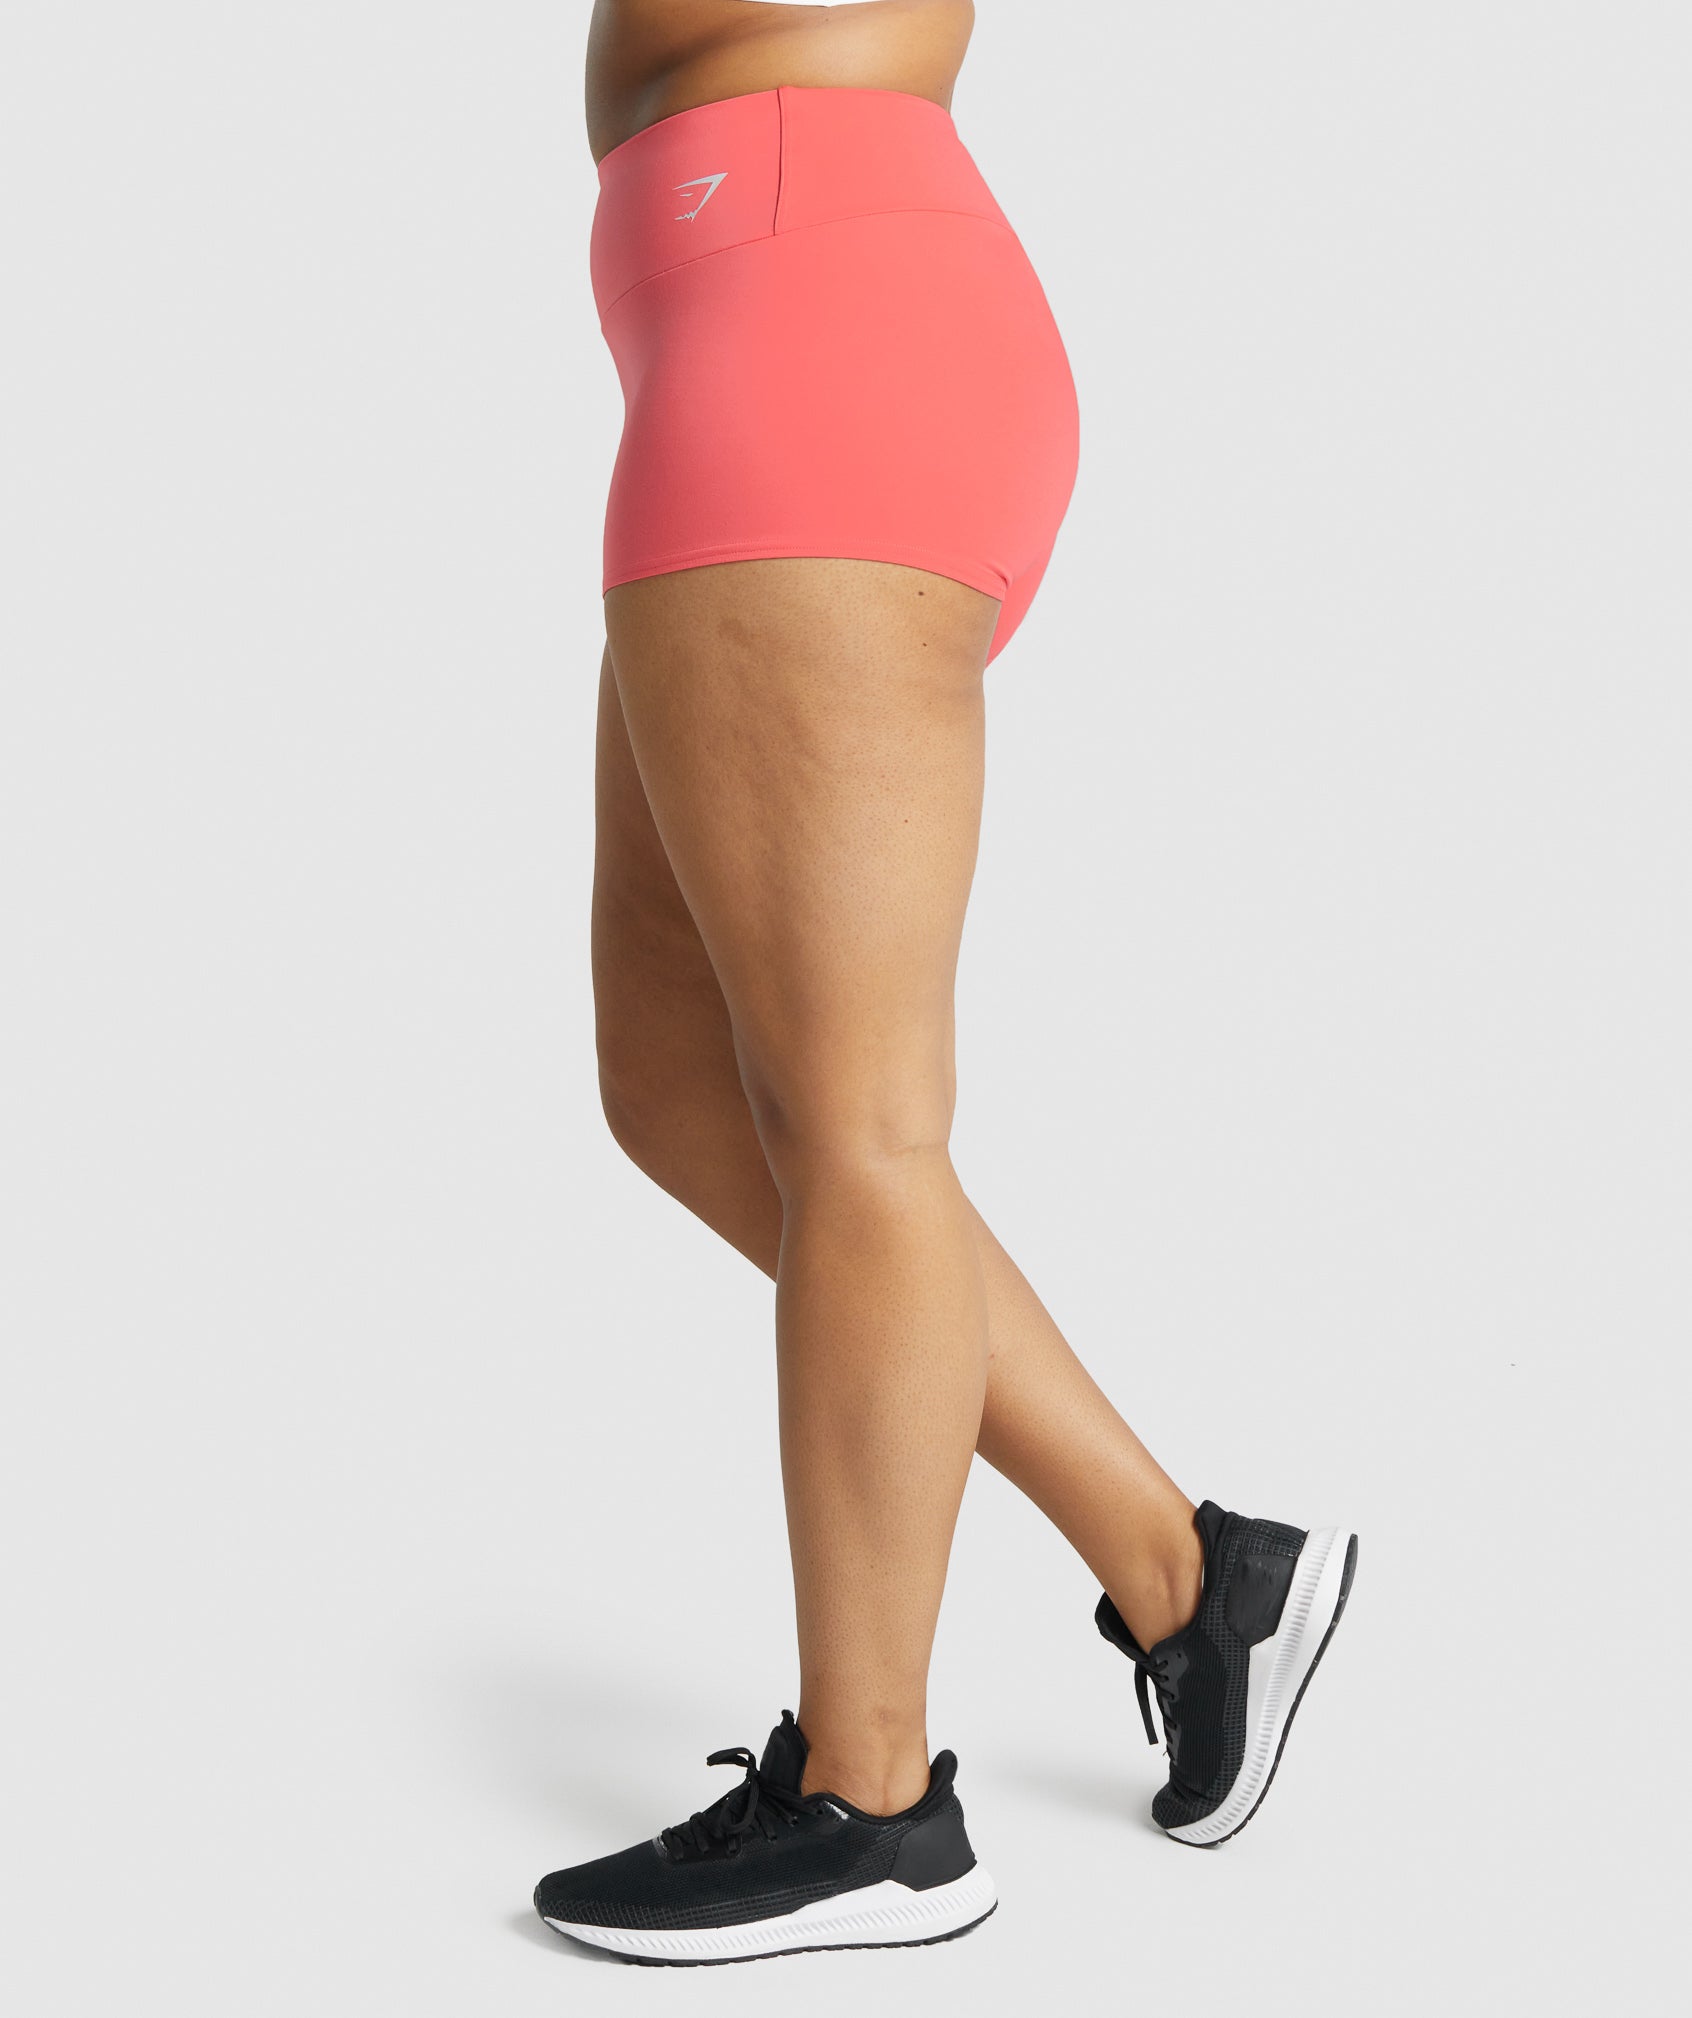 KYDRA Outfit Check: Apex Curved Hem Tee & Elevate Shorts Review 